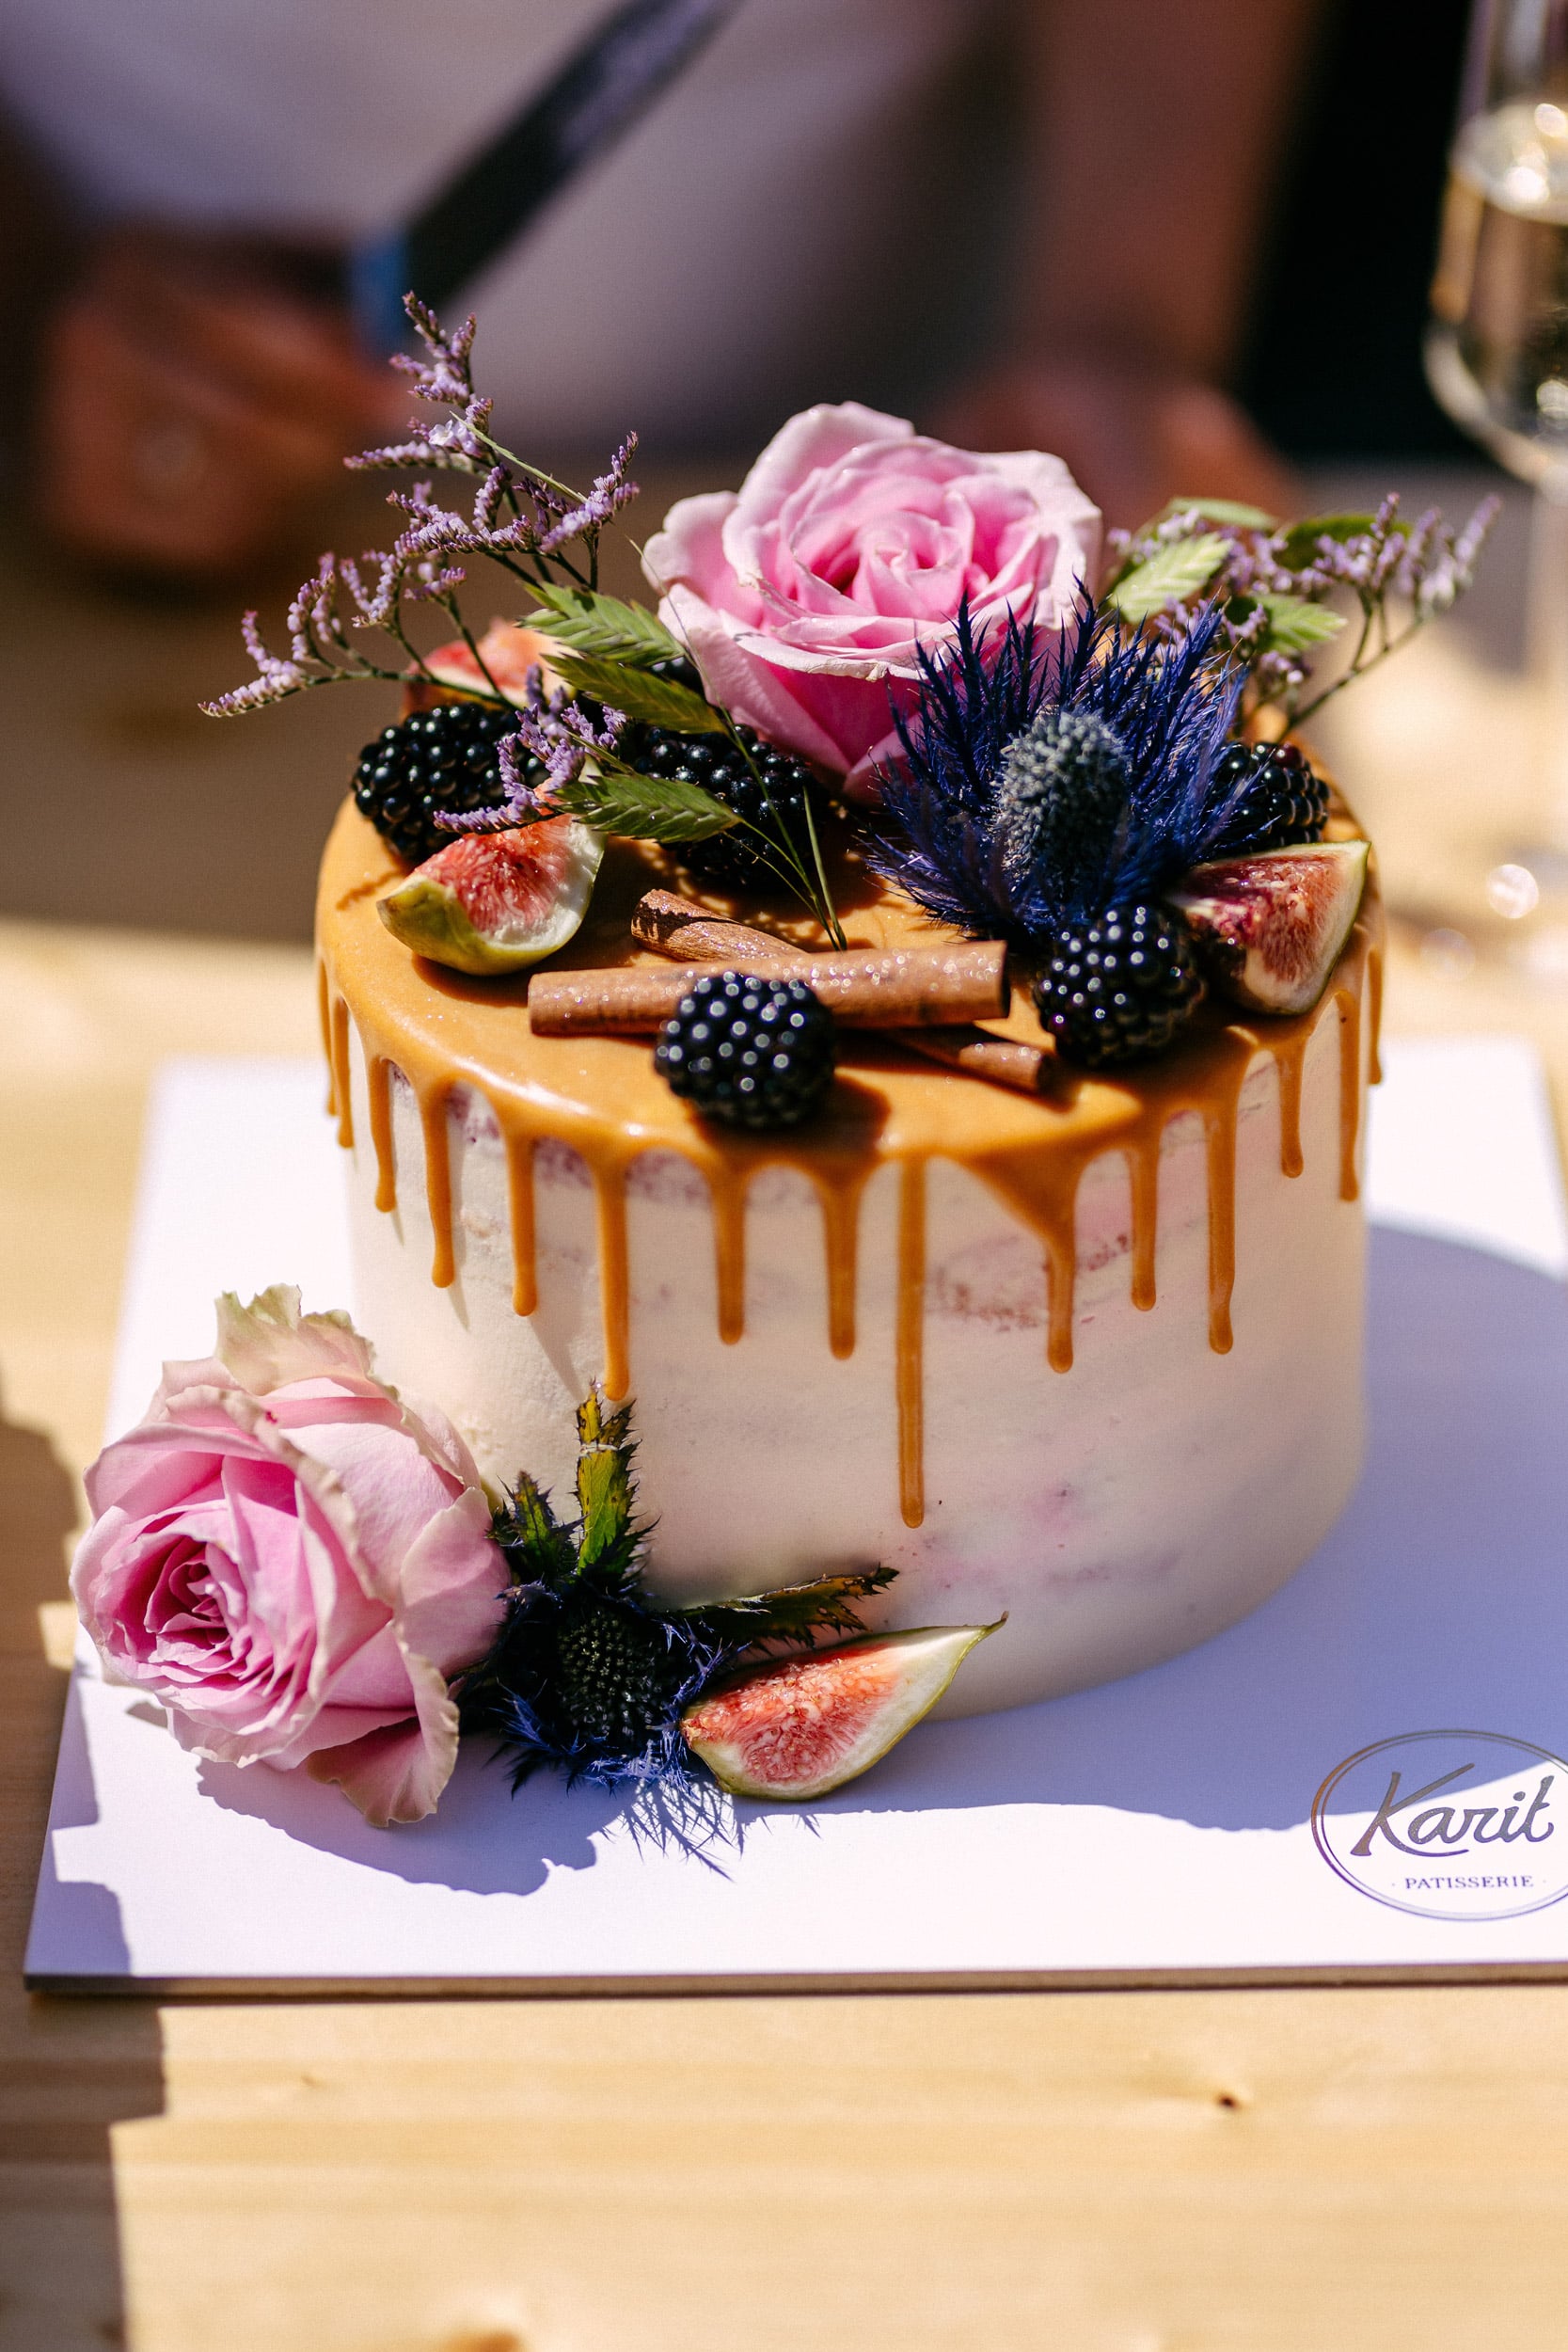 A wedding cake decorated with flowers and berries.